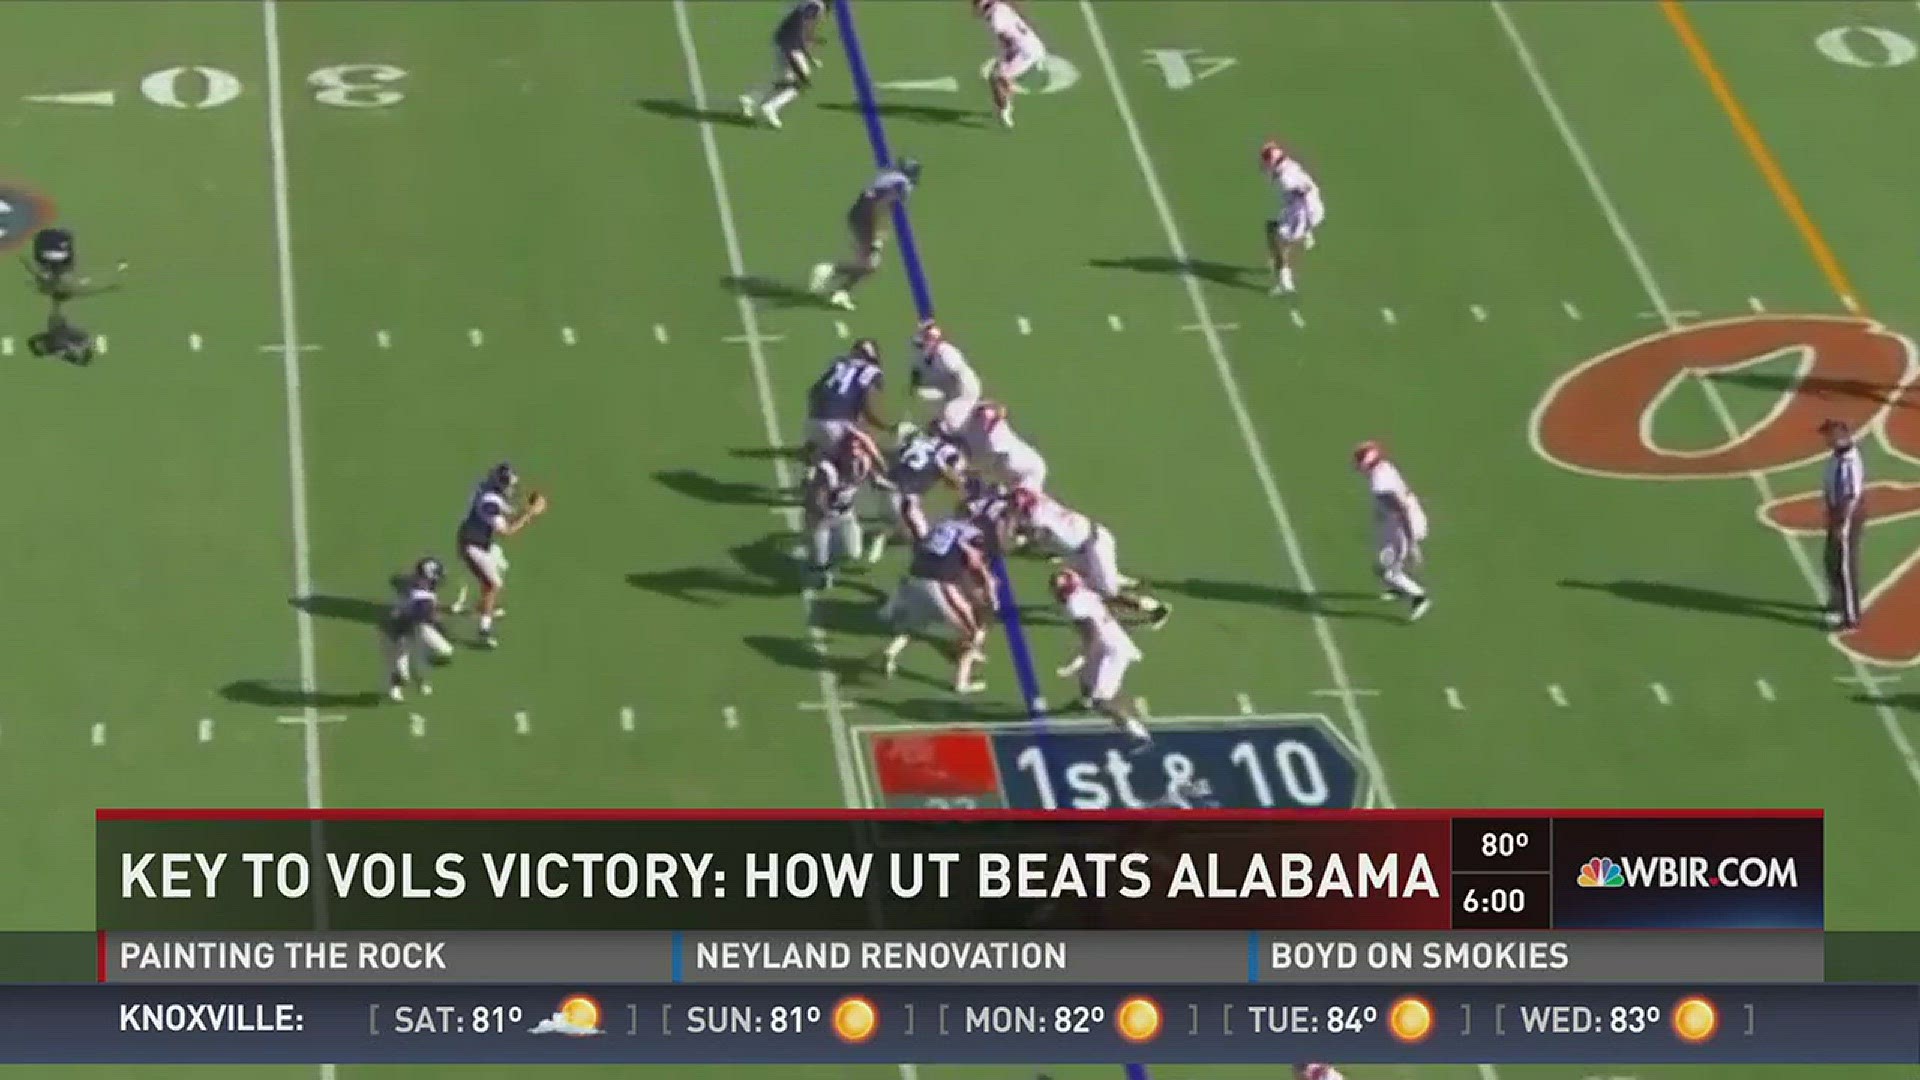 #1 Alabama is favored in Saturday's game, but there are some keys to victory for the Vols